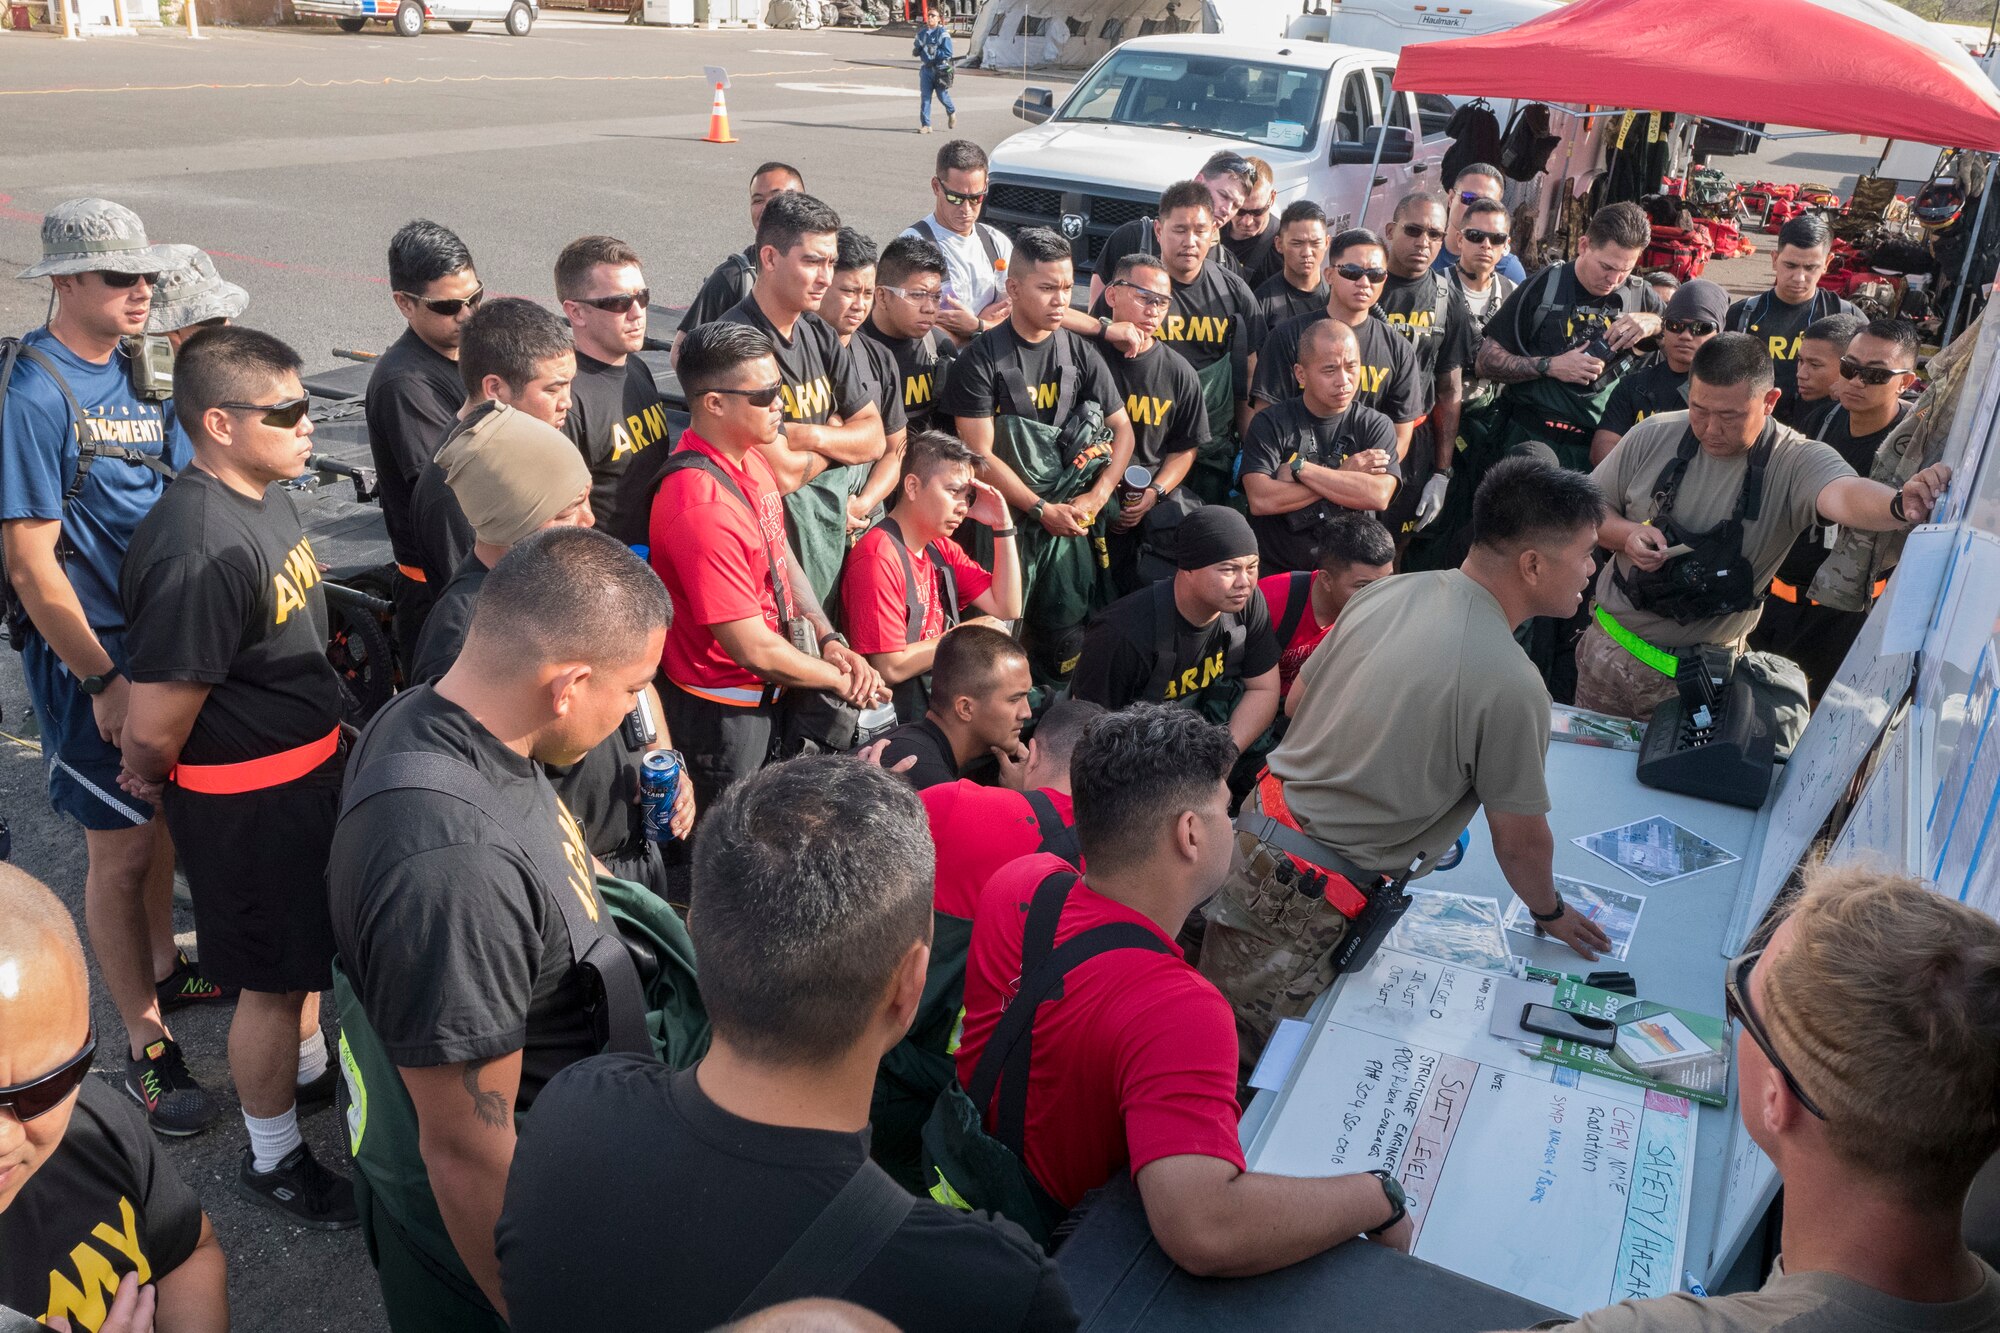 Search and extraction Airman and Soldiers from Hawaii’s Chemical, Biological, Radiological, Nuclear, and High-Yield Explosive, Enhanced-Response-Force-Package Team (CERFP) conduct a briefing during an evaluation exercise March 9, 2019, at Kalaeloa, Hawaii.